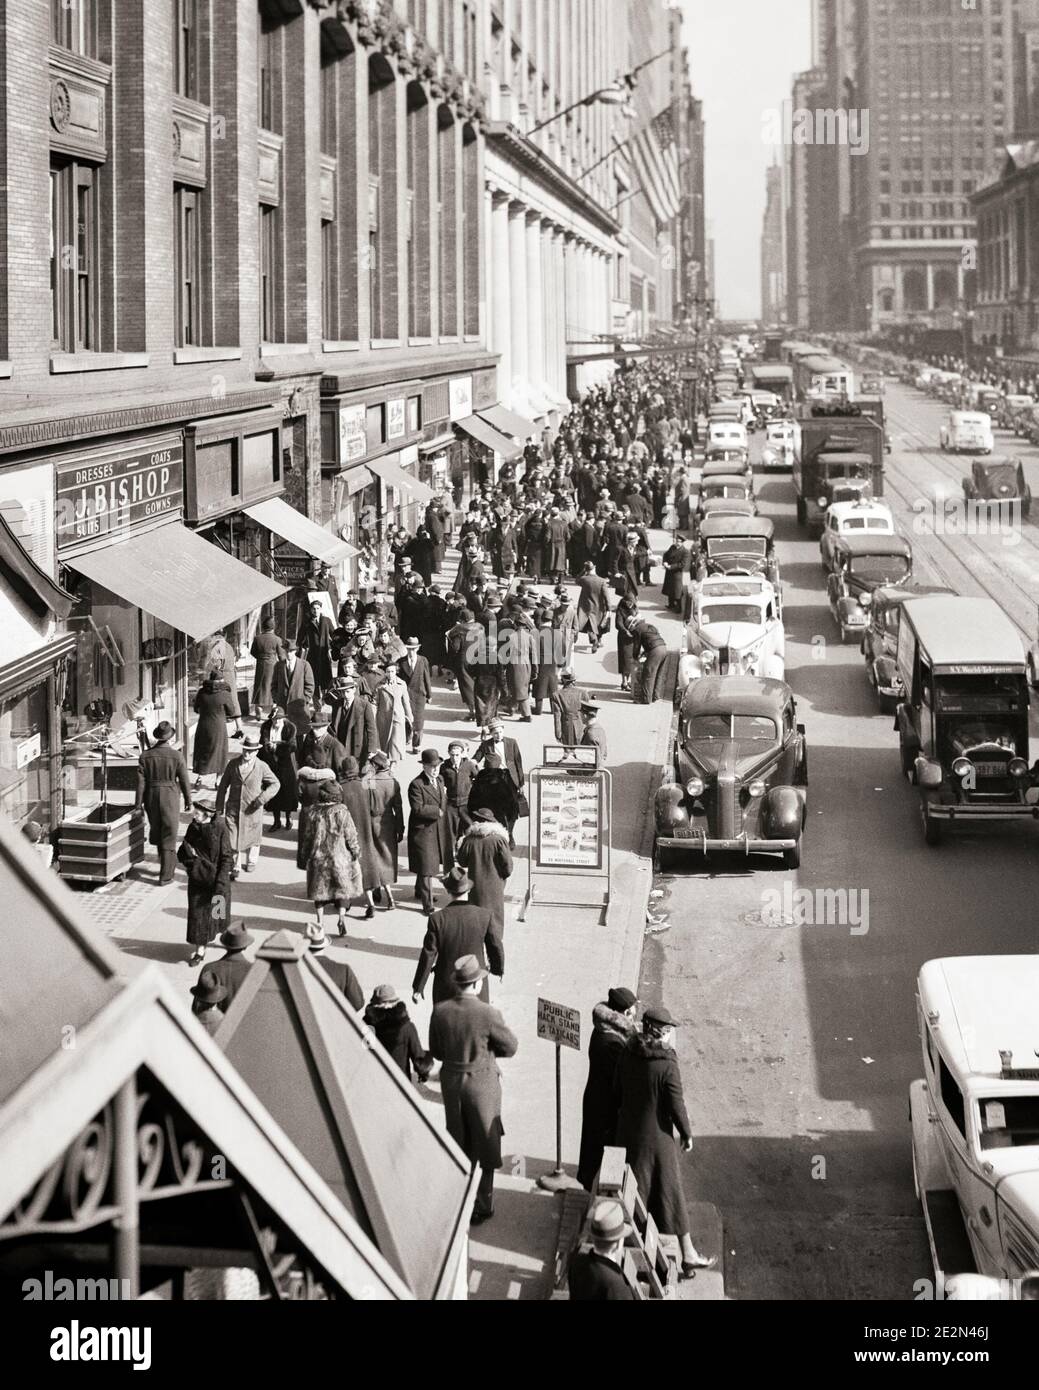 1930s 1940s LOOKING EAST ON WEST 42ND STREET TOWARDS 5TH AVENUE BUSY WITH SHOPPERS TRAFFIC TAKEN FROM 6TH AVENUE EL NYC NY USA - q45987 CPC001 HARS TAKEN SHOPPERS MIDTOWN PEDESTRIAN HIGH ANGLE AUTOS 5TH EXTERIOR NYC 6TH NEW YORK AUTOMOBILES CITIES VEHICLES NEW YORK CITY 42ND BLACK AND WHITE EL OLD FASHIONED Stock Photo